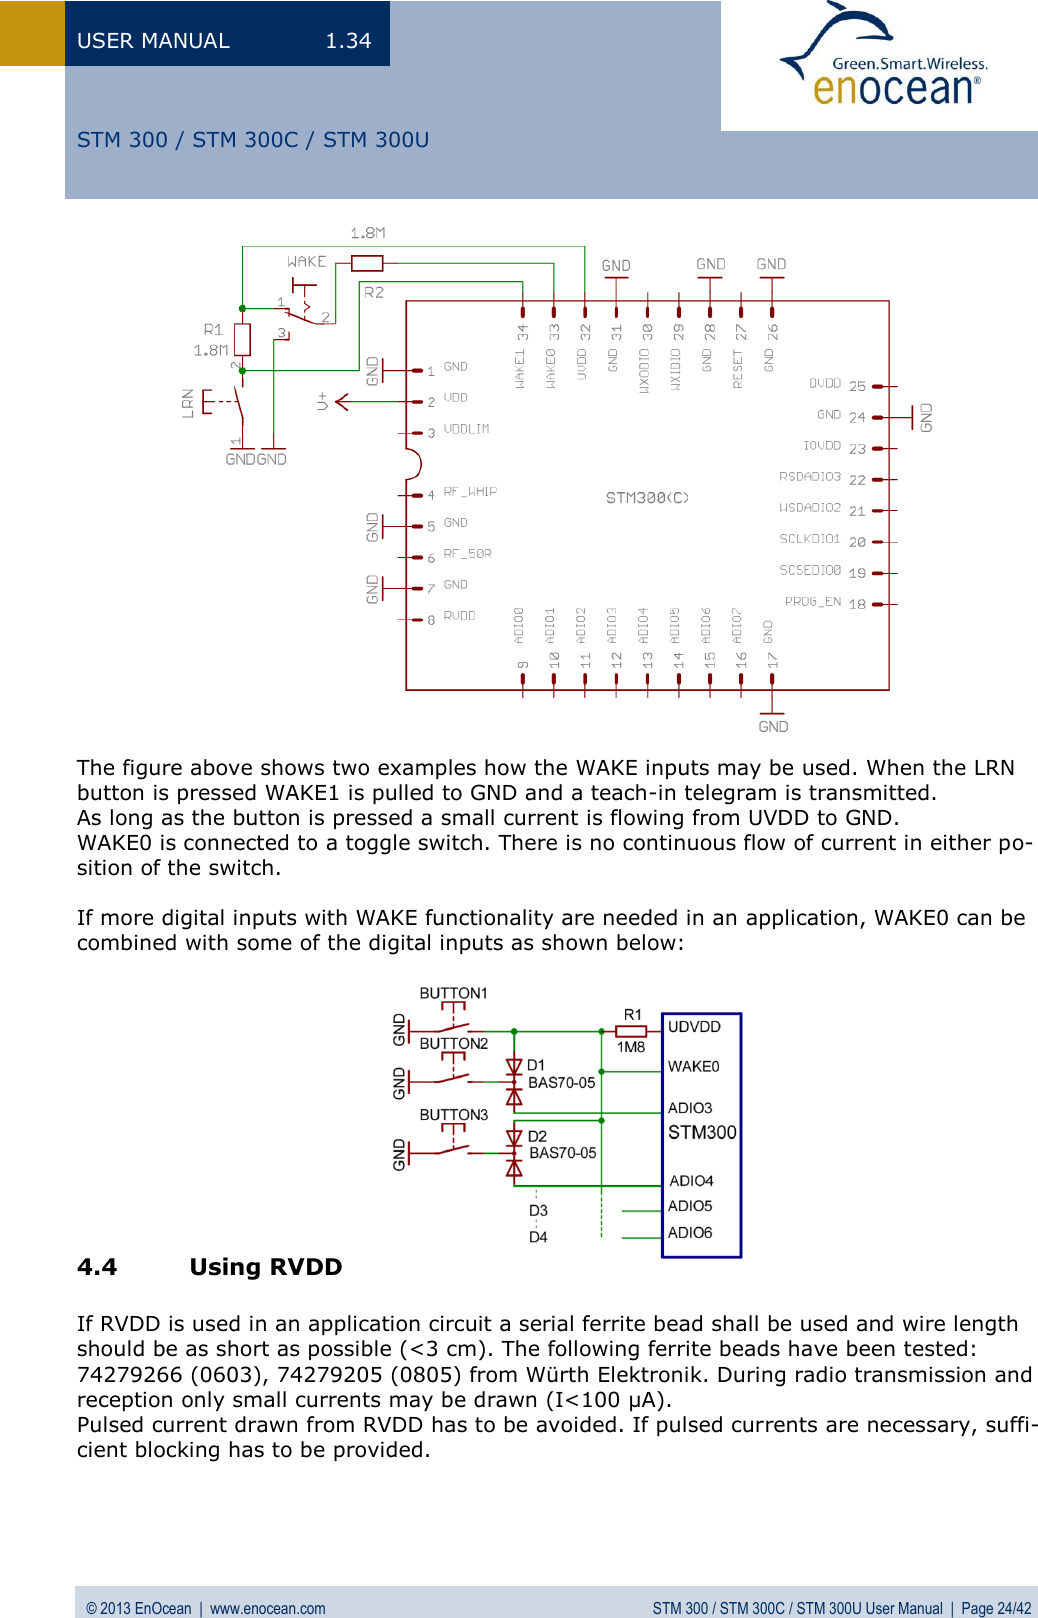 USER MANUAL  1.34 © 2013 EnOcean  |  www.enocean.com  STM 300 / STM 300C / STM 300U User Manual  |  Page 24/42   STM 300 / STM 300C / STM 300U                 The figure above shows two examples how the WAKE inputs may be used. When the LRN button is pressed WAKE1 is pulled to GND and a teach-in telegram is transmitted.  As long as the button is pressed a small current is flowing from UVDD to GND.  WAKE0 is connected to a toggle switch. There is no continuous flow of current in either po-sition of the switch.  If more digital inputs with WAKE functionality are needed in an application, WAKE0 can be combined with some of the digital inputs as shown below:            4.4 Using RVDD  If RVDD is used in an application circuit a serial ferrite bead shall be used and wire length should be as short as possible (&lt;3 cm). The following ferrite beads have been tested: 74279266 (0603), 74279205 (0805) from Würth Elektronik. During radio transmission and reception only small currents may be drawn (I&lt;100 µA).  Pulsed current drawn from RVDD has to be avoided. If pulsed currents are necessary, suffi-cient blocking has to be provided. 